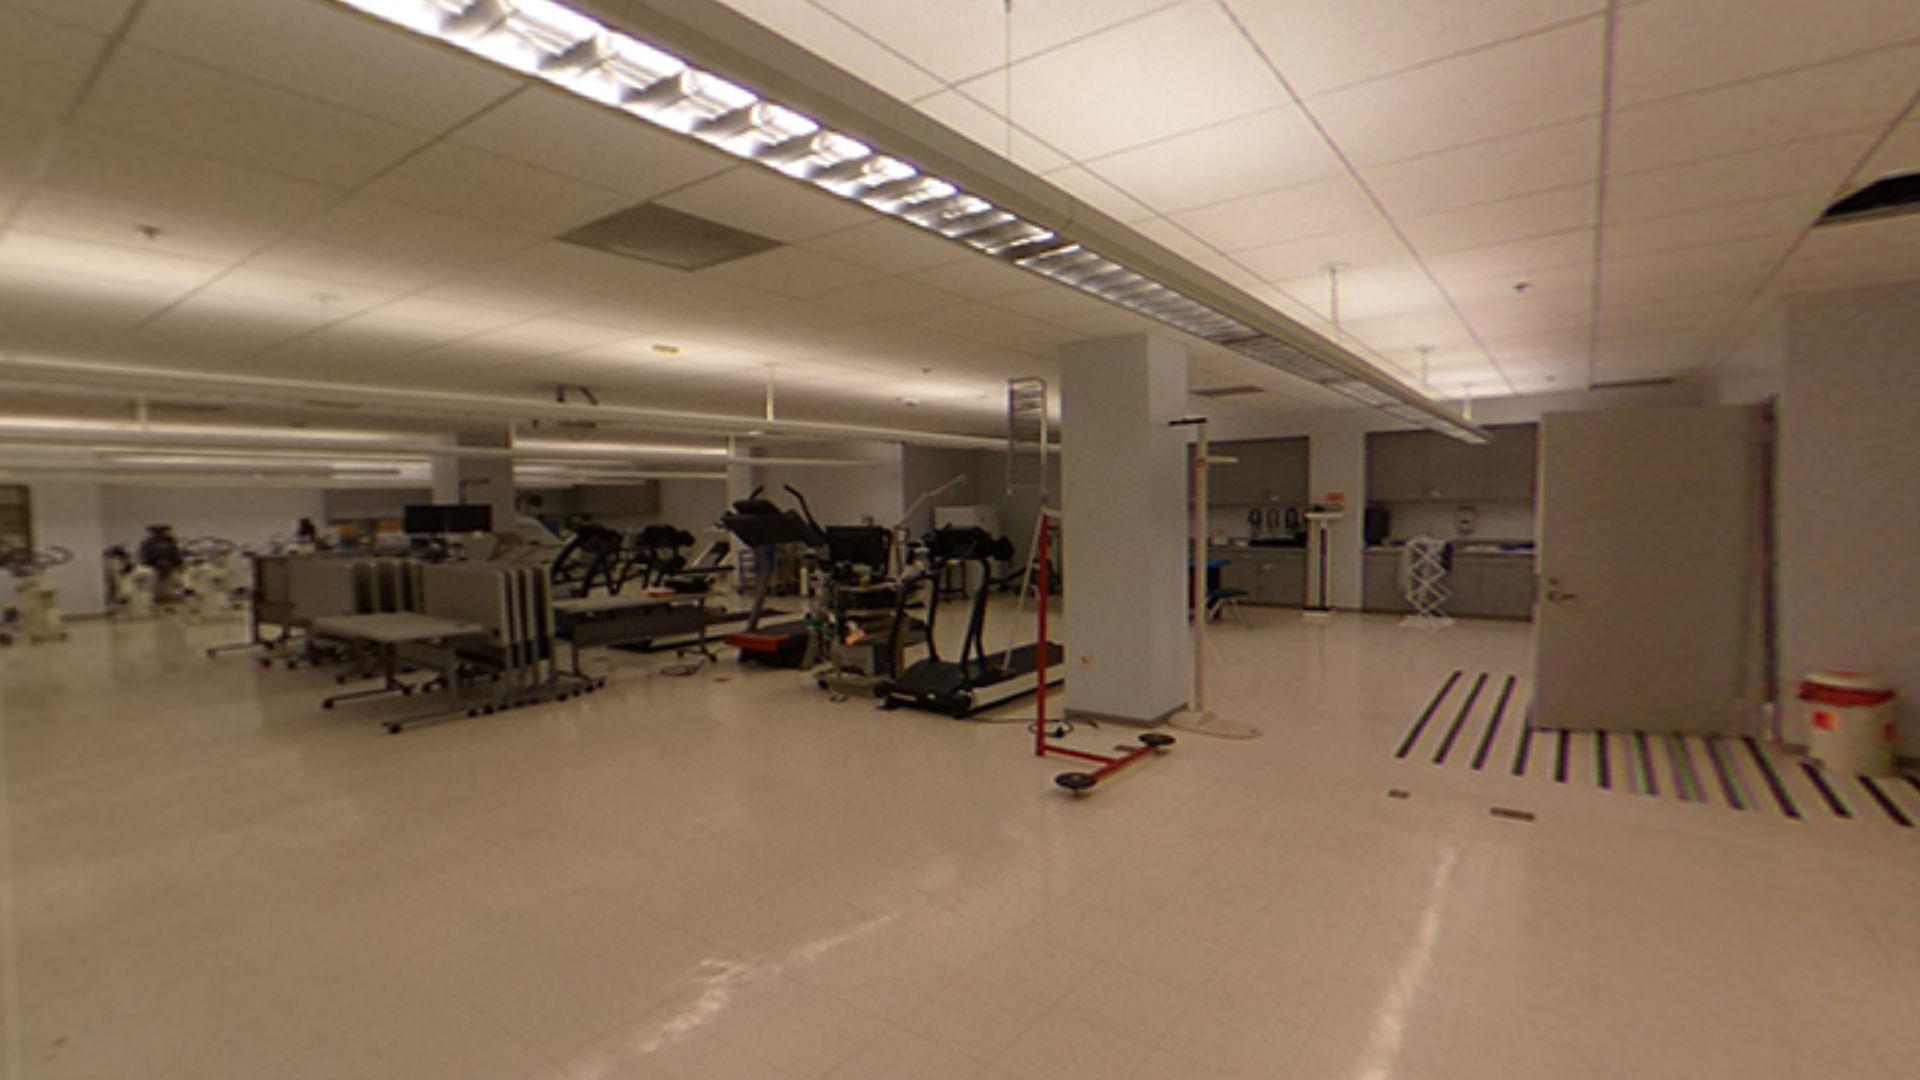 Overview of the whole lab